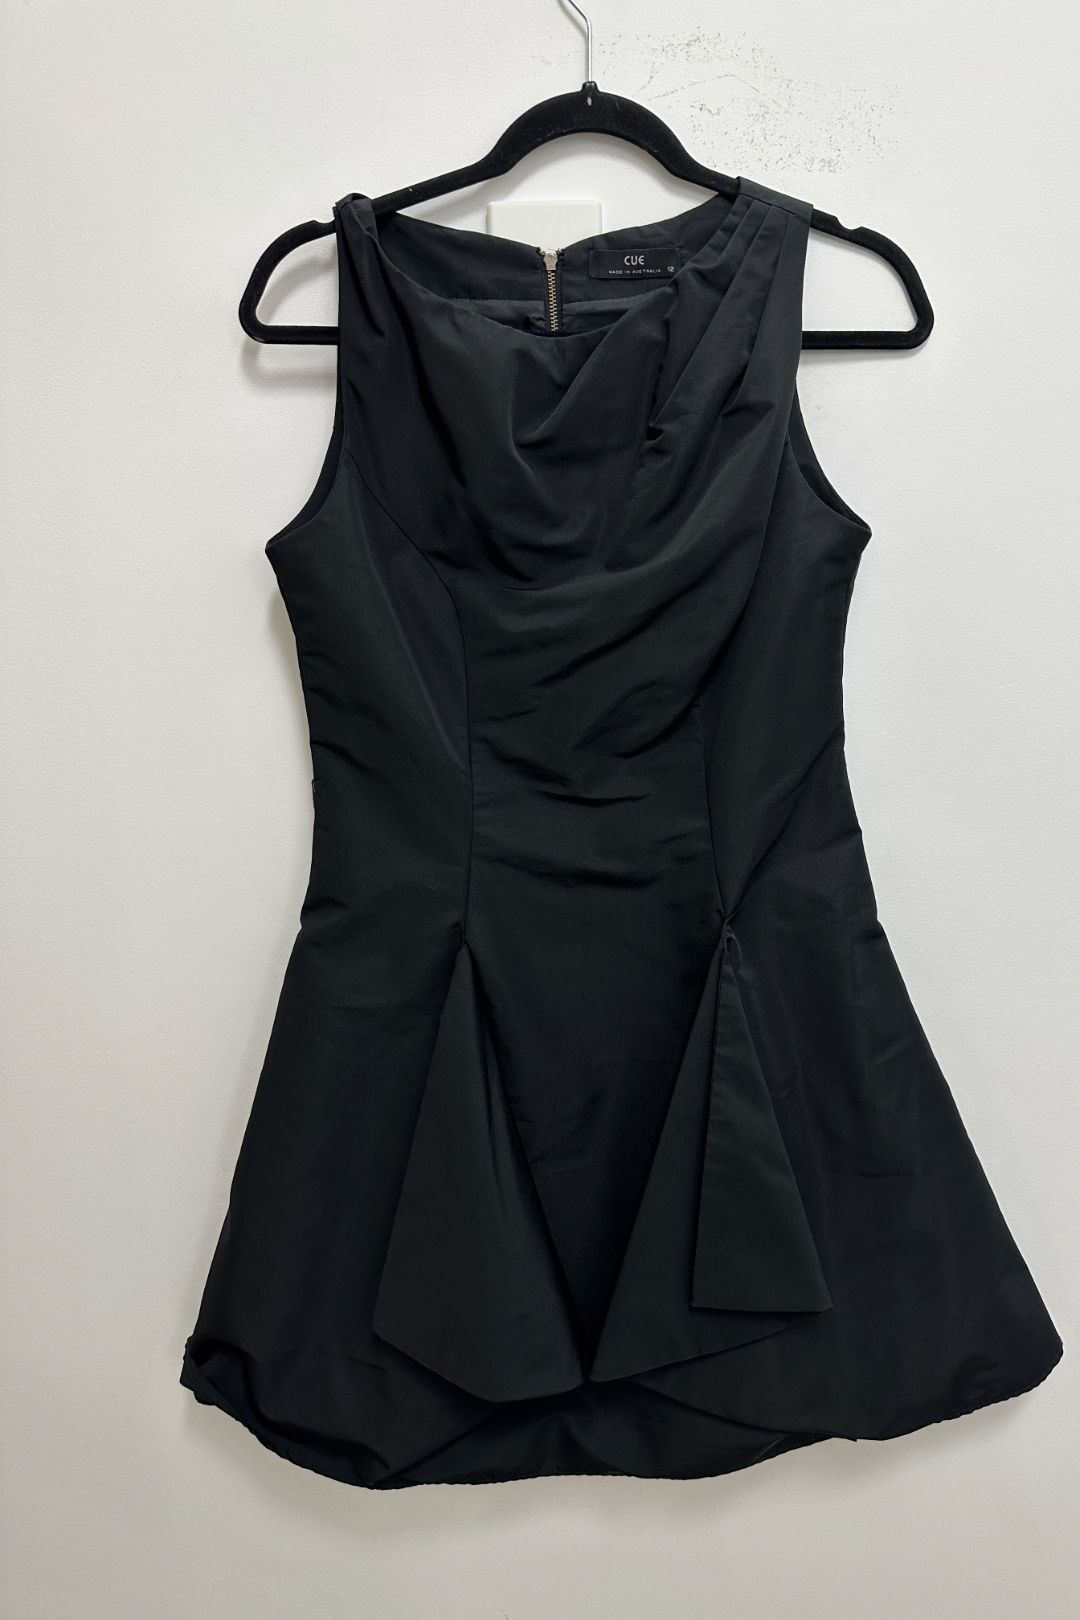 Cue - Black Flared Party Dress